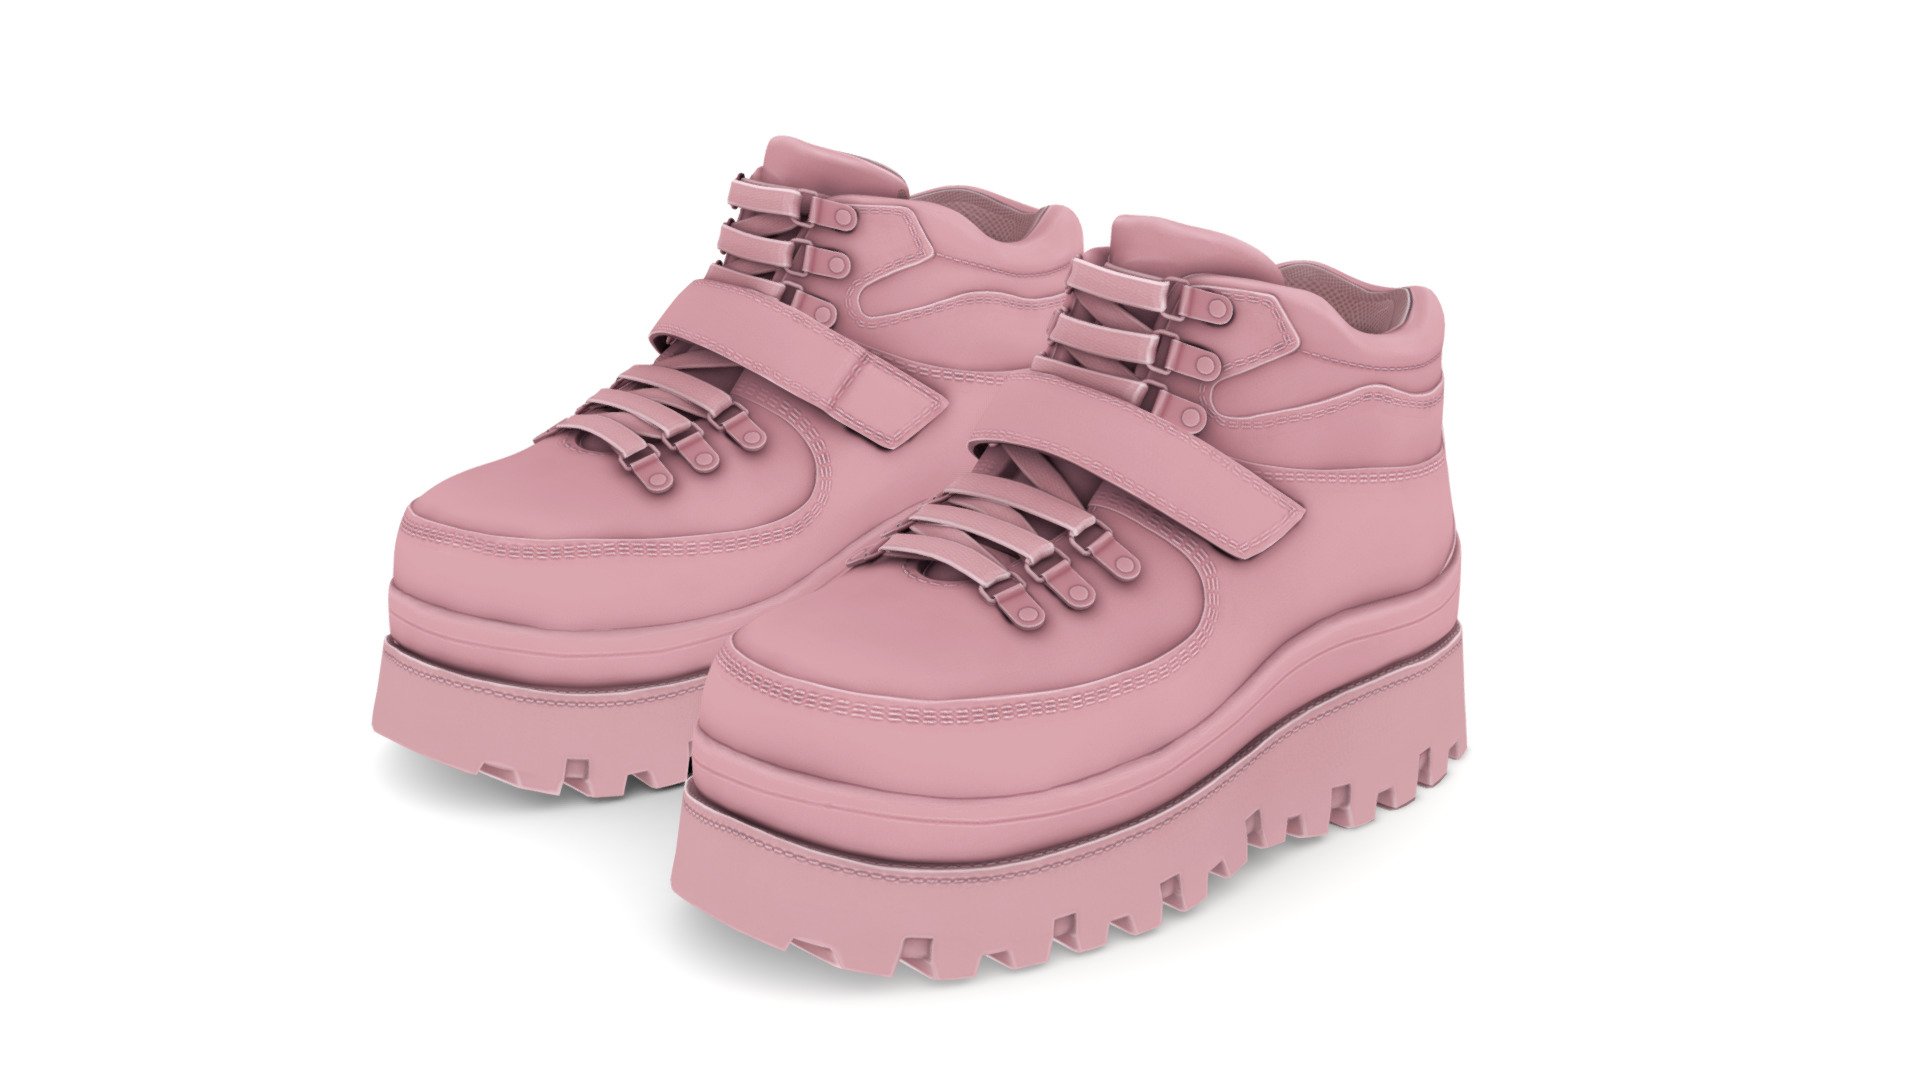 Can fit to any character, ready for games

Quads, Clean Topology

No overlapping logical unwrapped UVs

1 Color (Pink) -Design Baked Diffuse Texture Map

Normal and Specular Maps

FBX, OBJ

PBR Or Classic - Pink Cross Platform Shoes - Buy Royalty Free 3D model by FizzyDesign 3d model